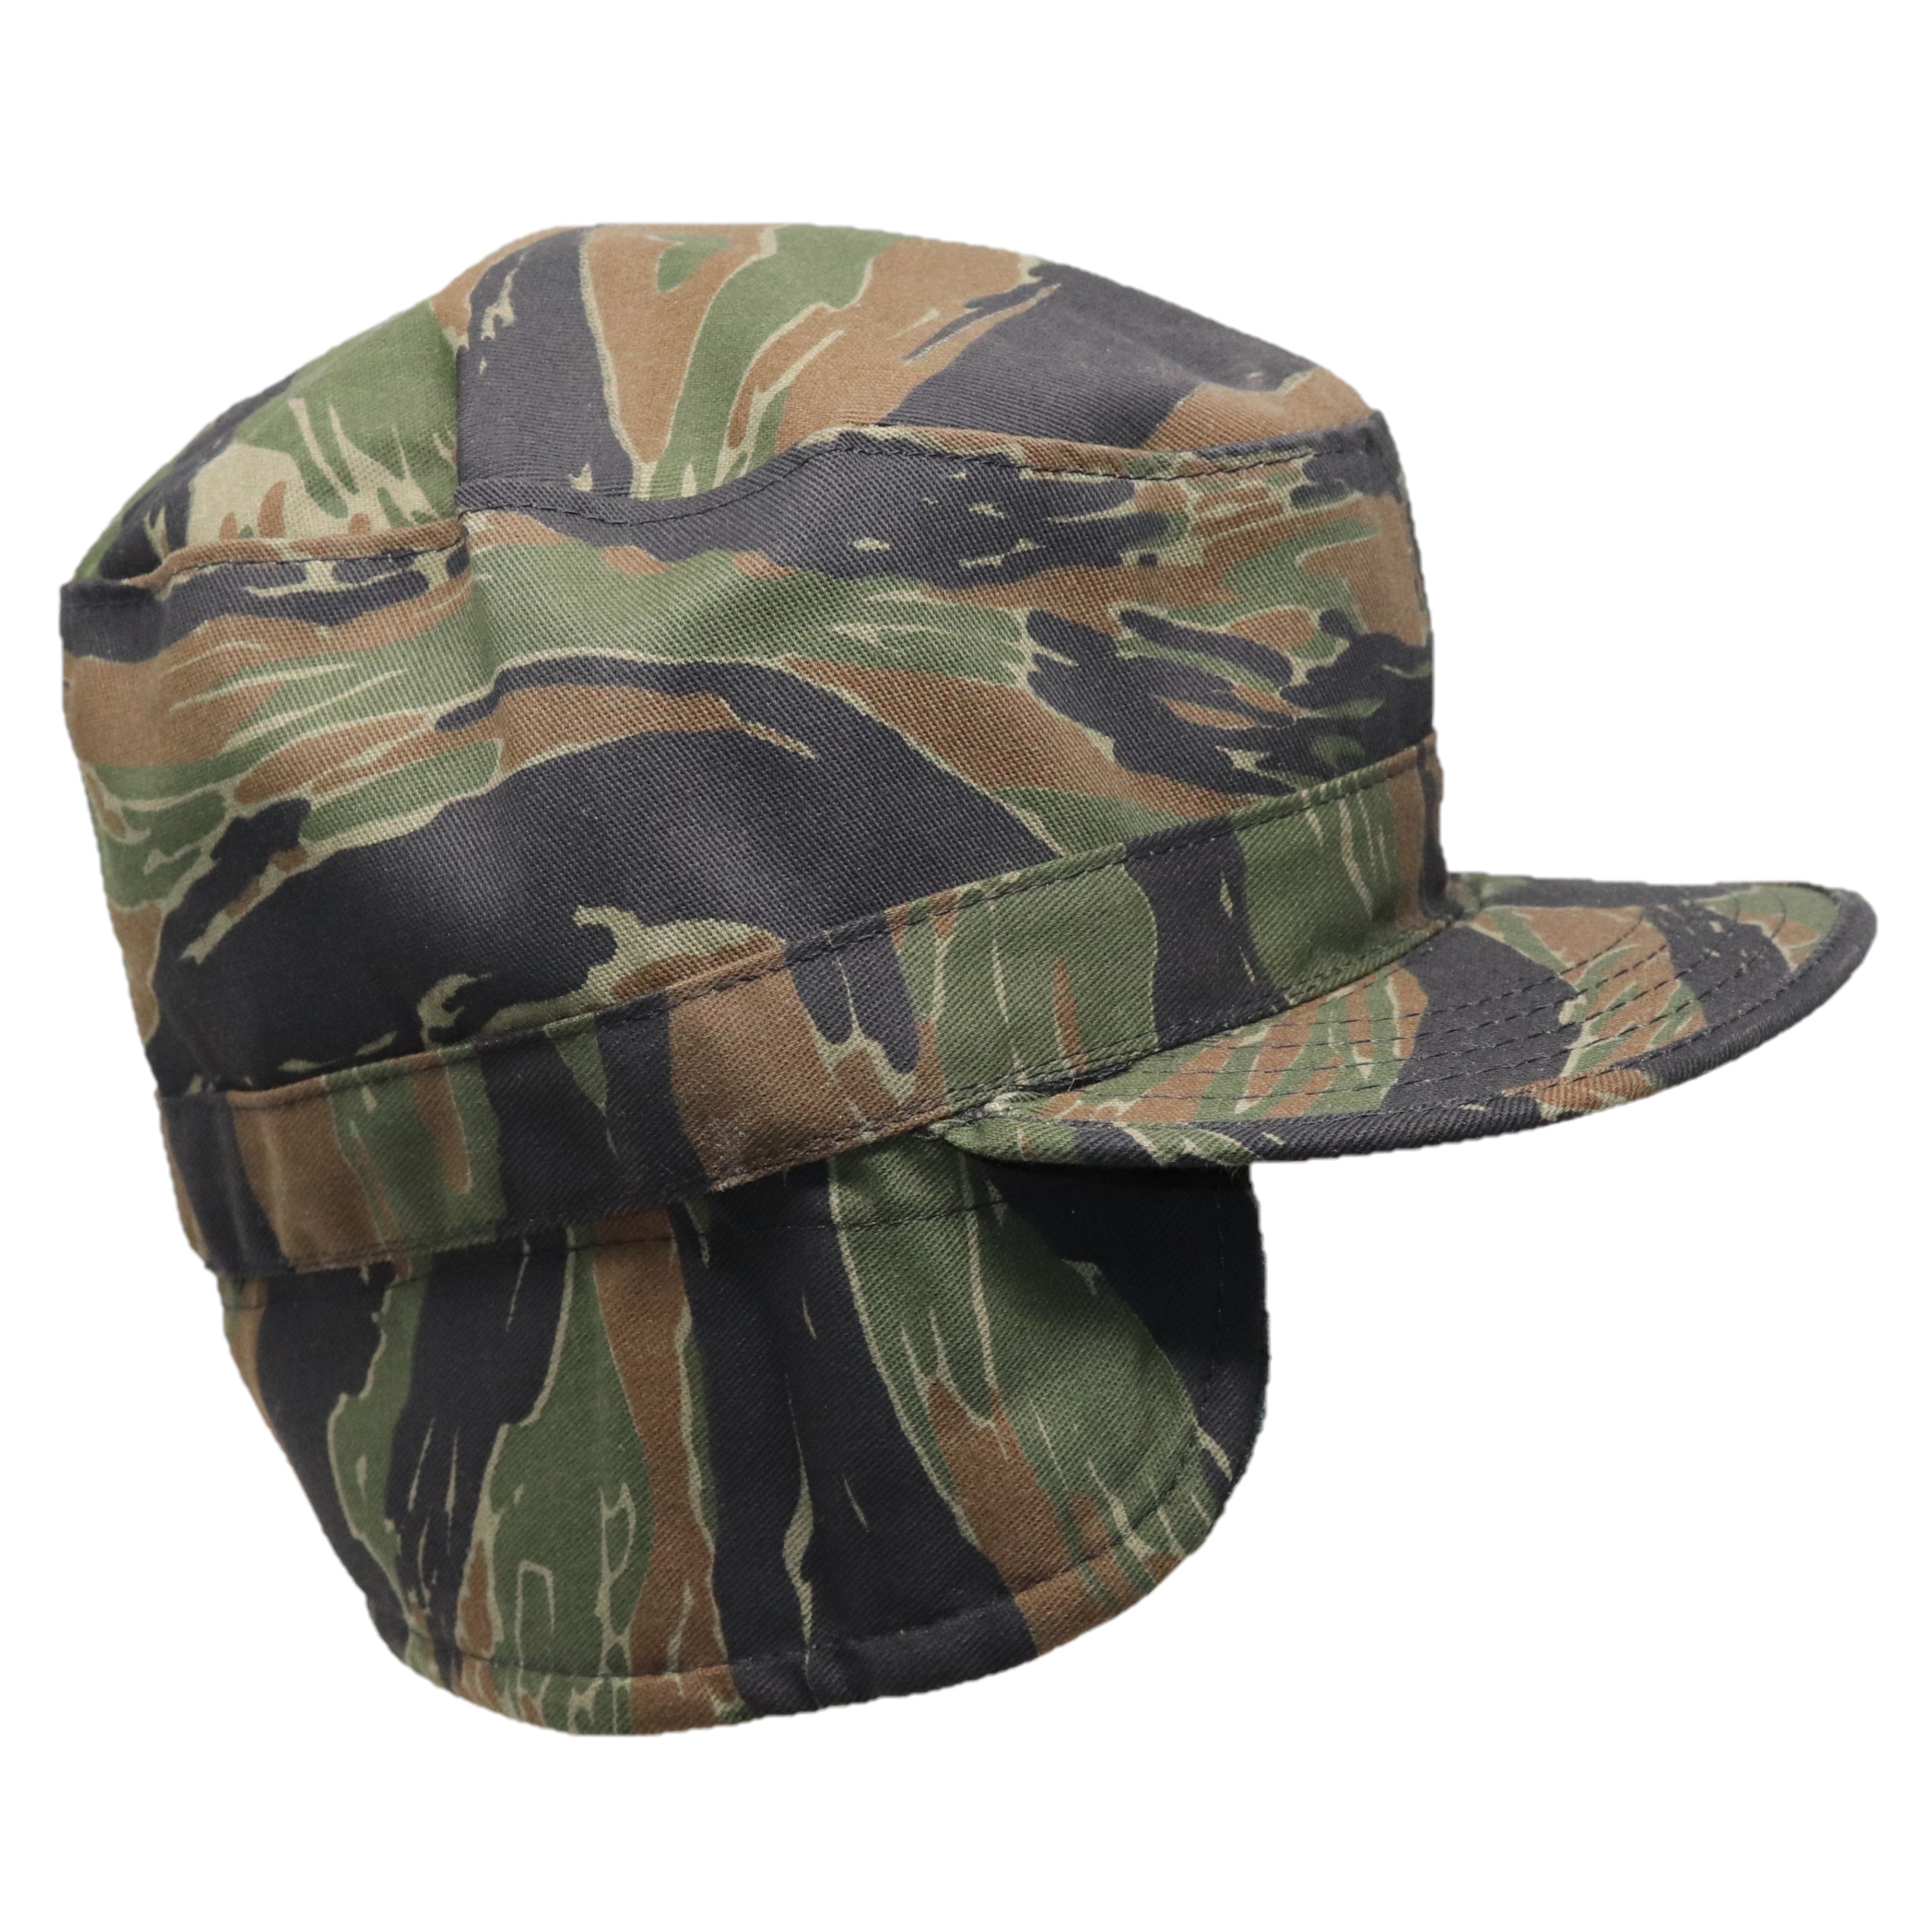 GI Style Ranger Cap with Ear Flaps – McGuire Army Navy